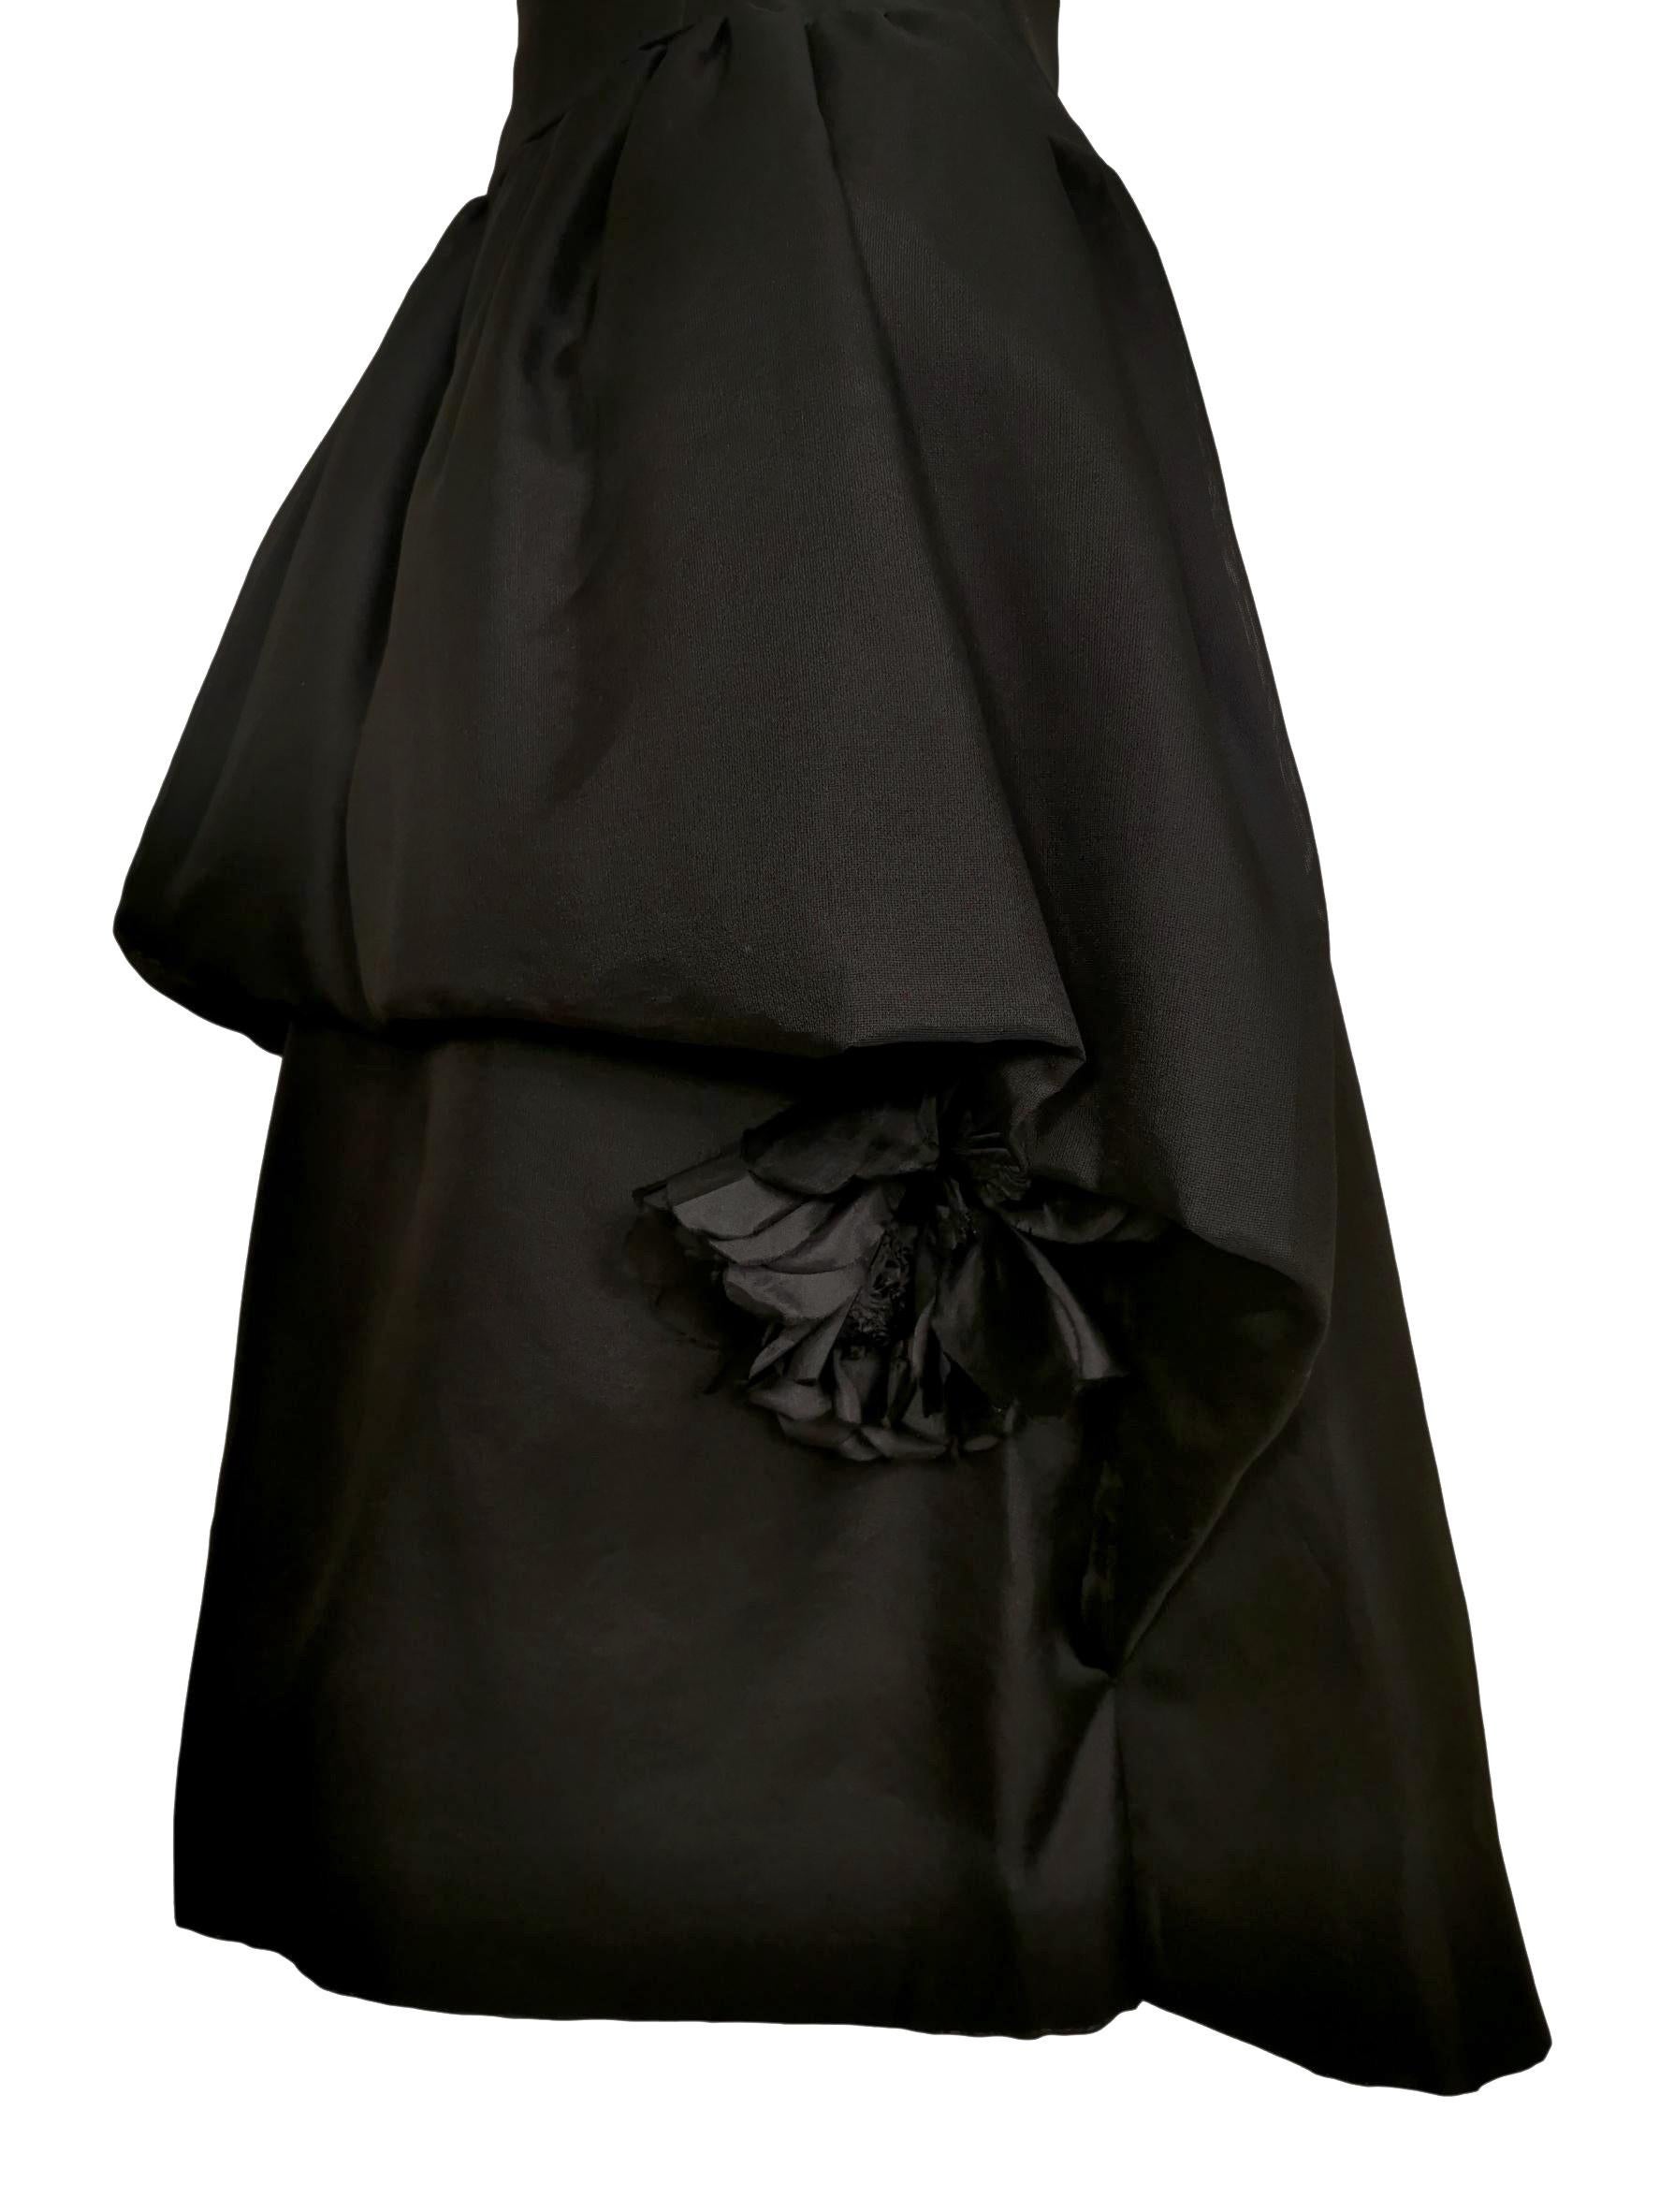 Black Jacques Heim Silk Gazar Dress Numbered Exclusive to Harrods For Sale